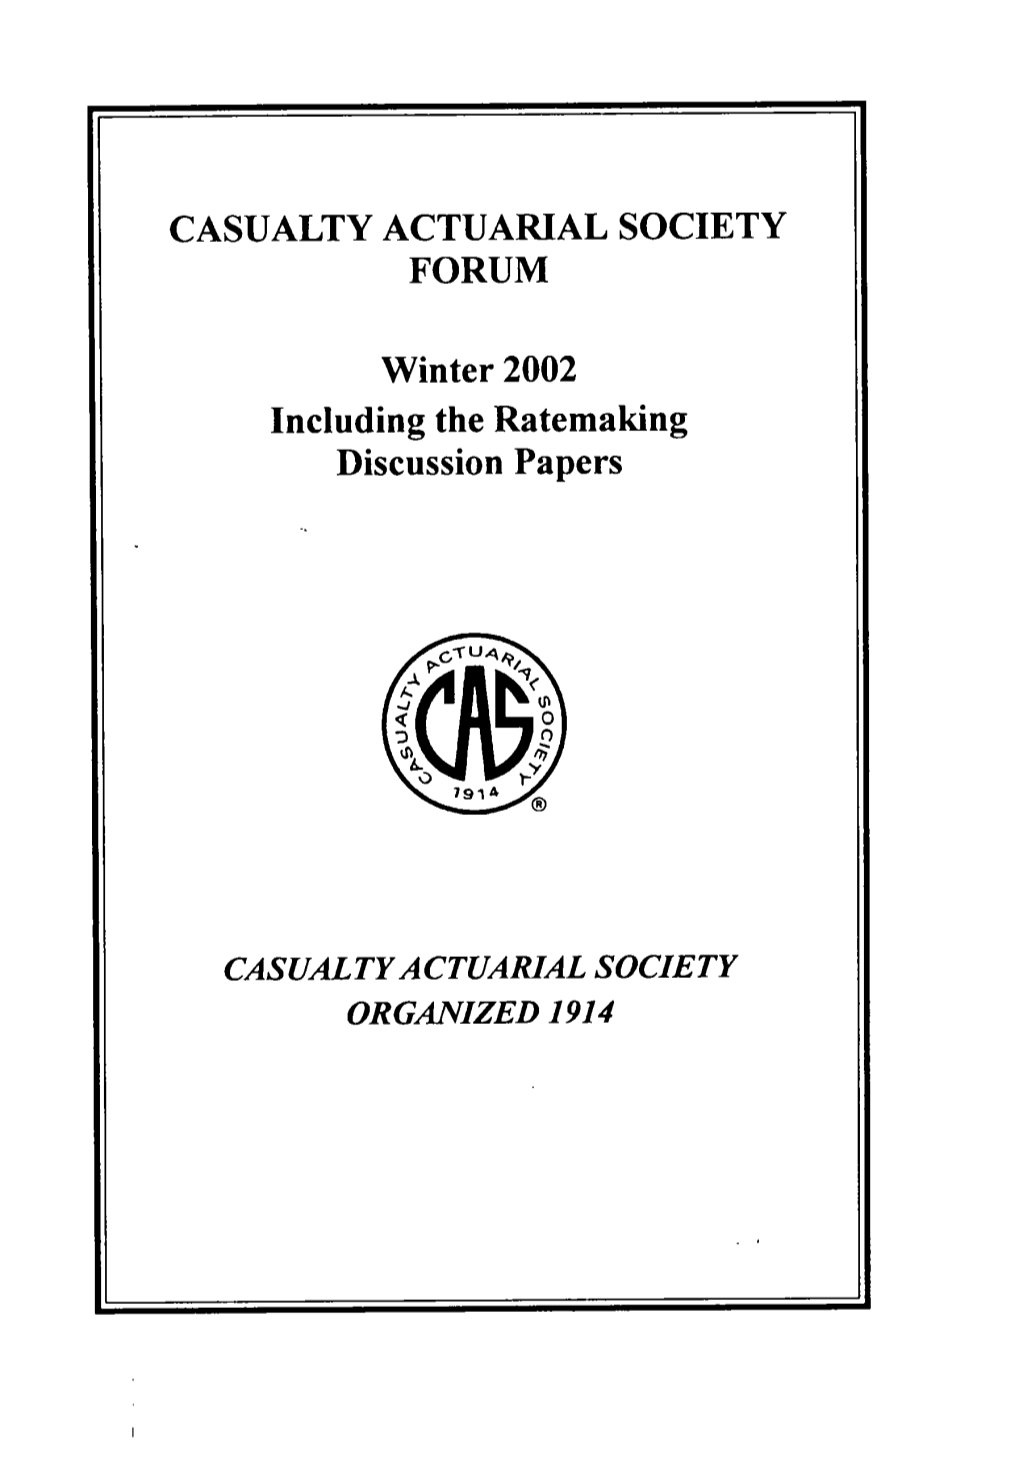 2002 Winter Forum Including the Ratemaking Discussion Papers